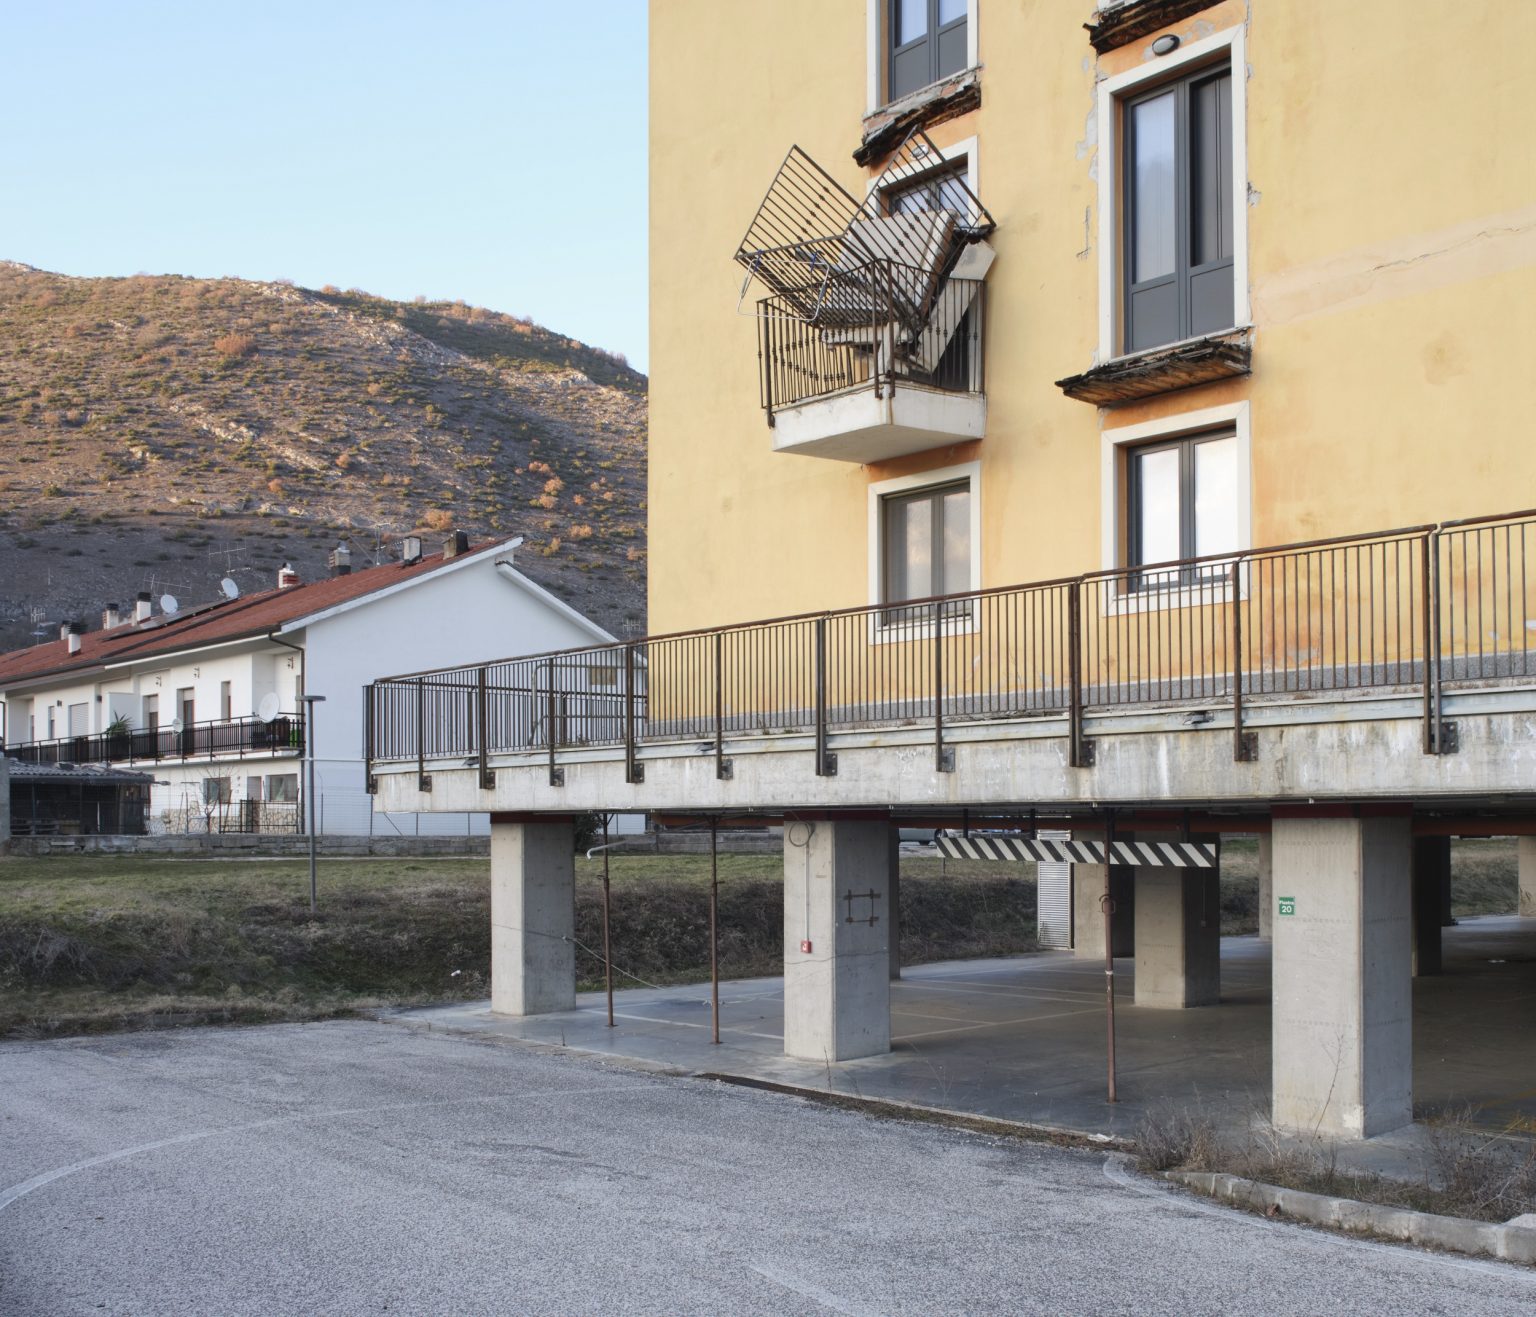 Homes of the C.A.S.E. (Sustainable and environmentally friendly anti-seismic complexes). Some of the structures were cleared due to structural problems. Preturo, L'Aquila, Italy, 2019.